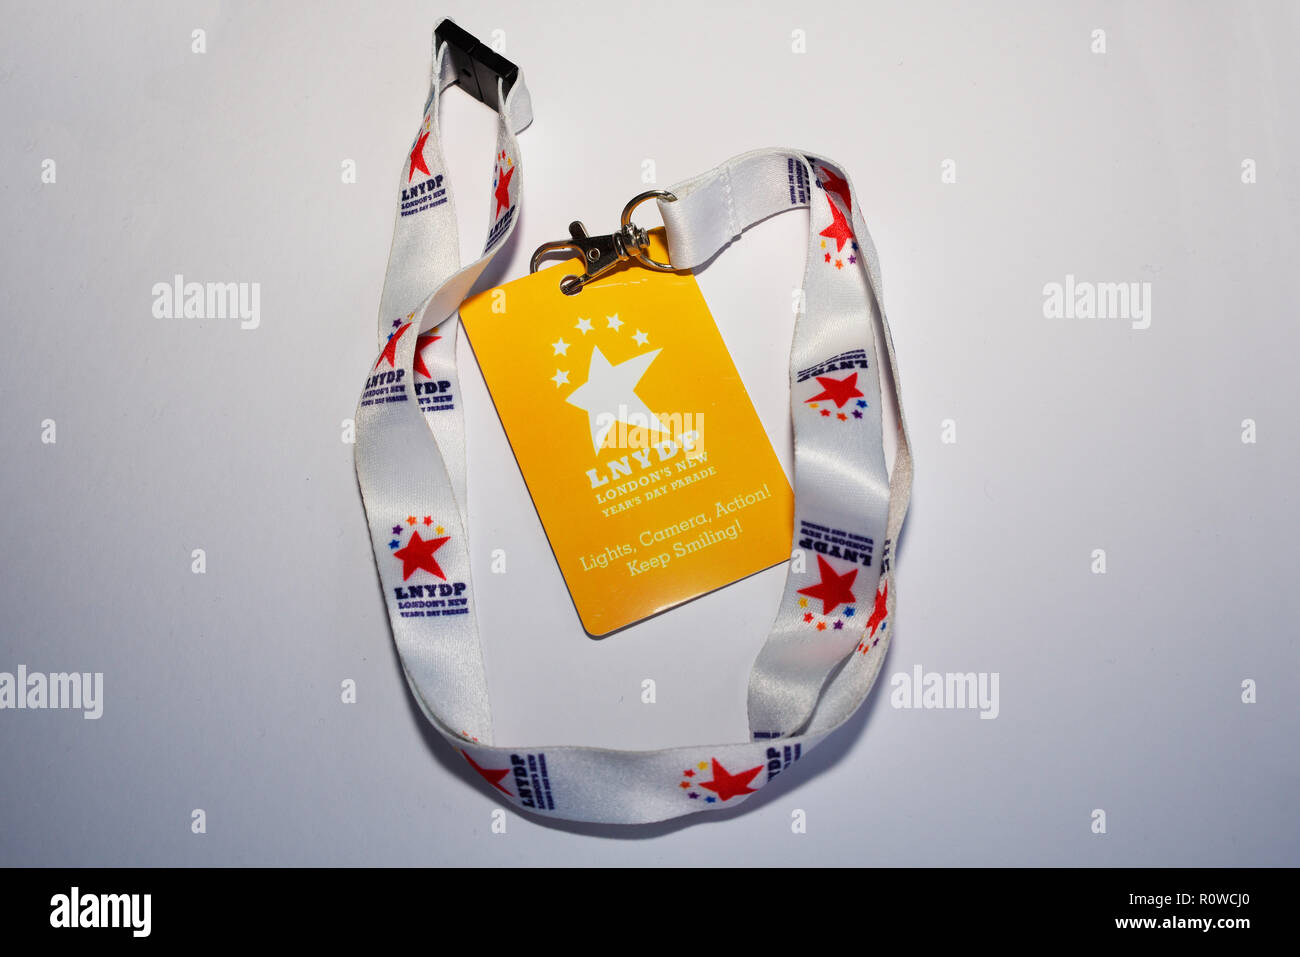 London New Year Day Parade media pass on a lanyard neck strap. Isolated on a white background. LNYDP. Lights, camera, action Stock Photo